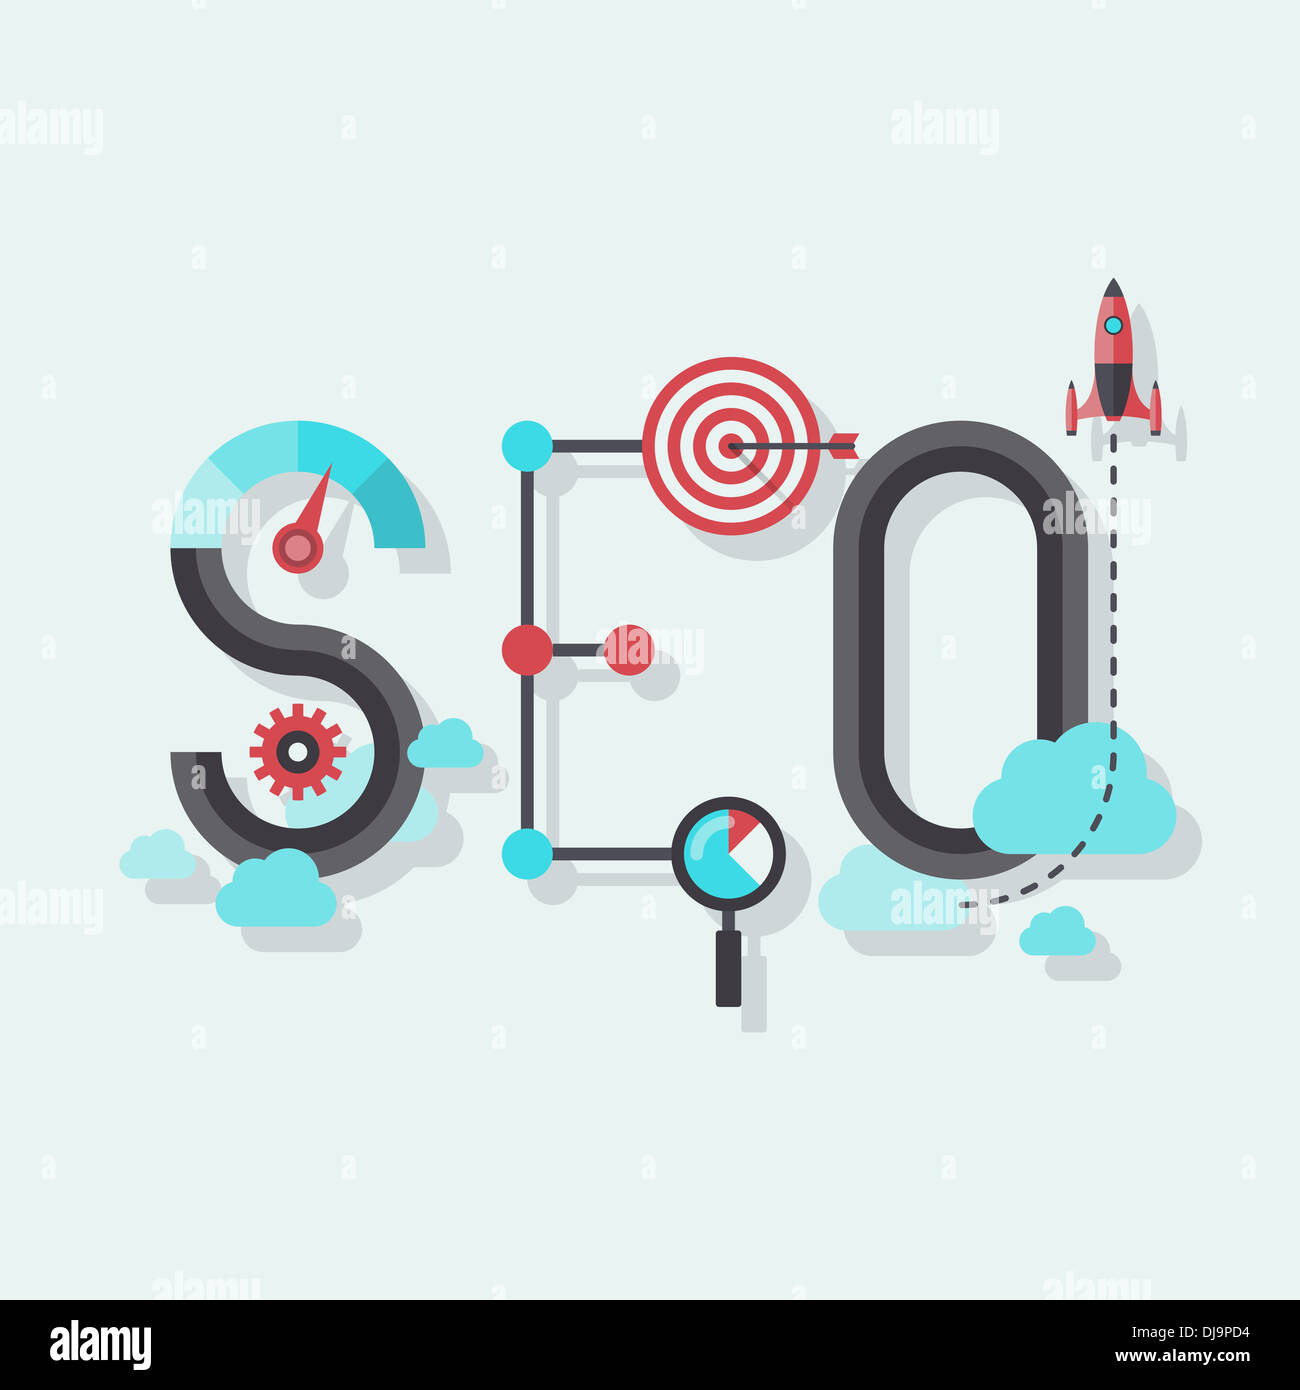 Illustration concept of seo word combined from elements and icons which symbolized success internet search optimization process Stock Photo